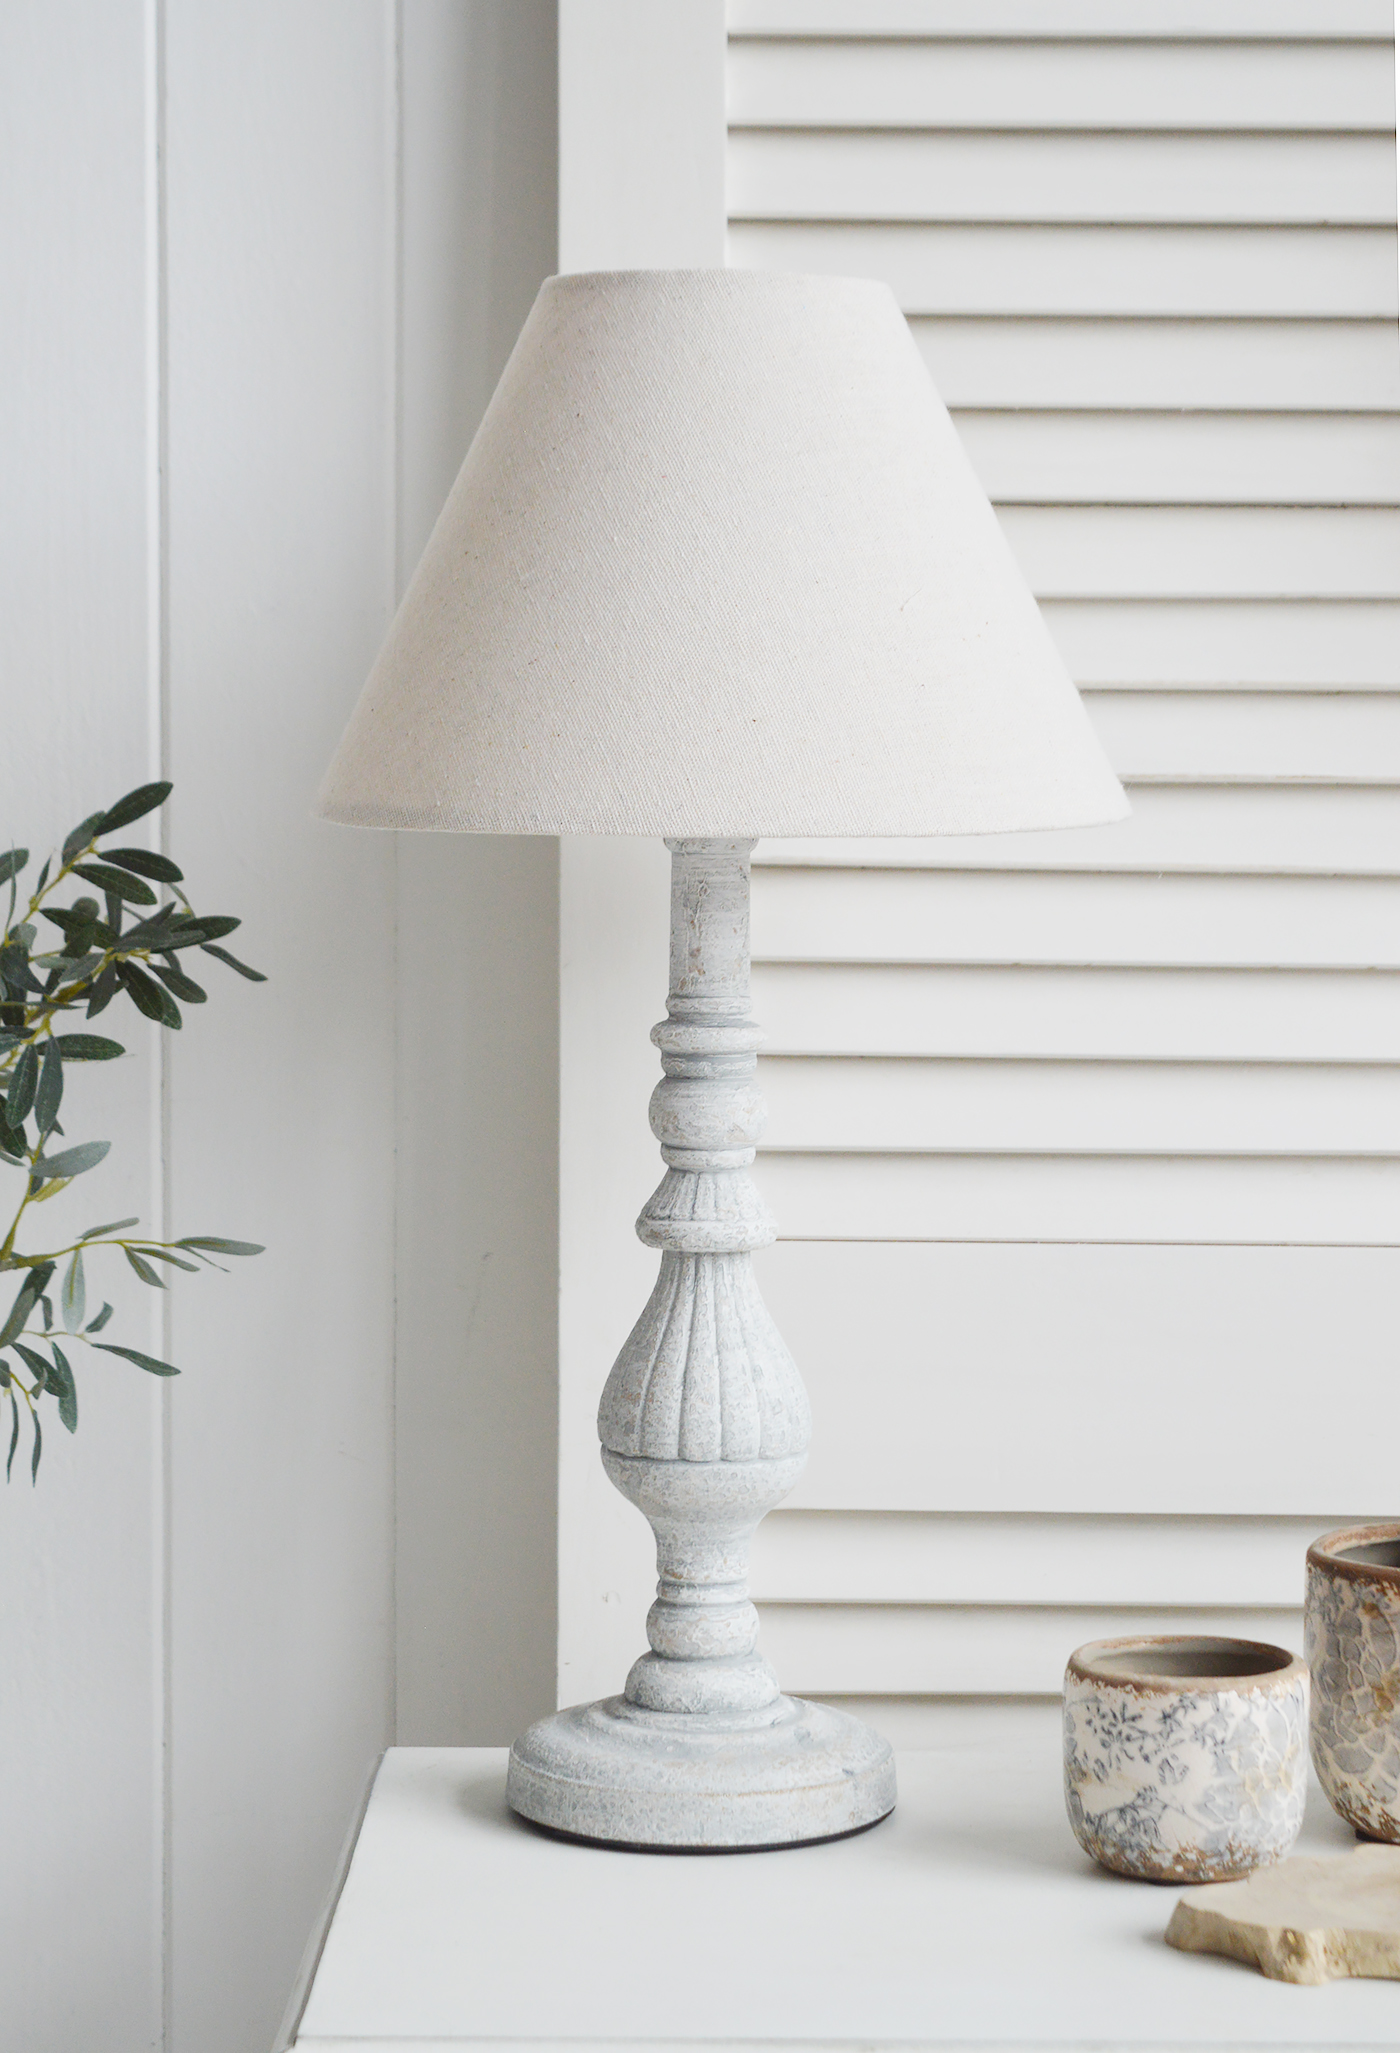 La Maison Rustic Grey Table Lamp The, Shabby Chic Tall Table Lamps